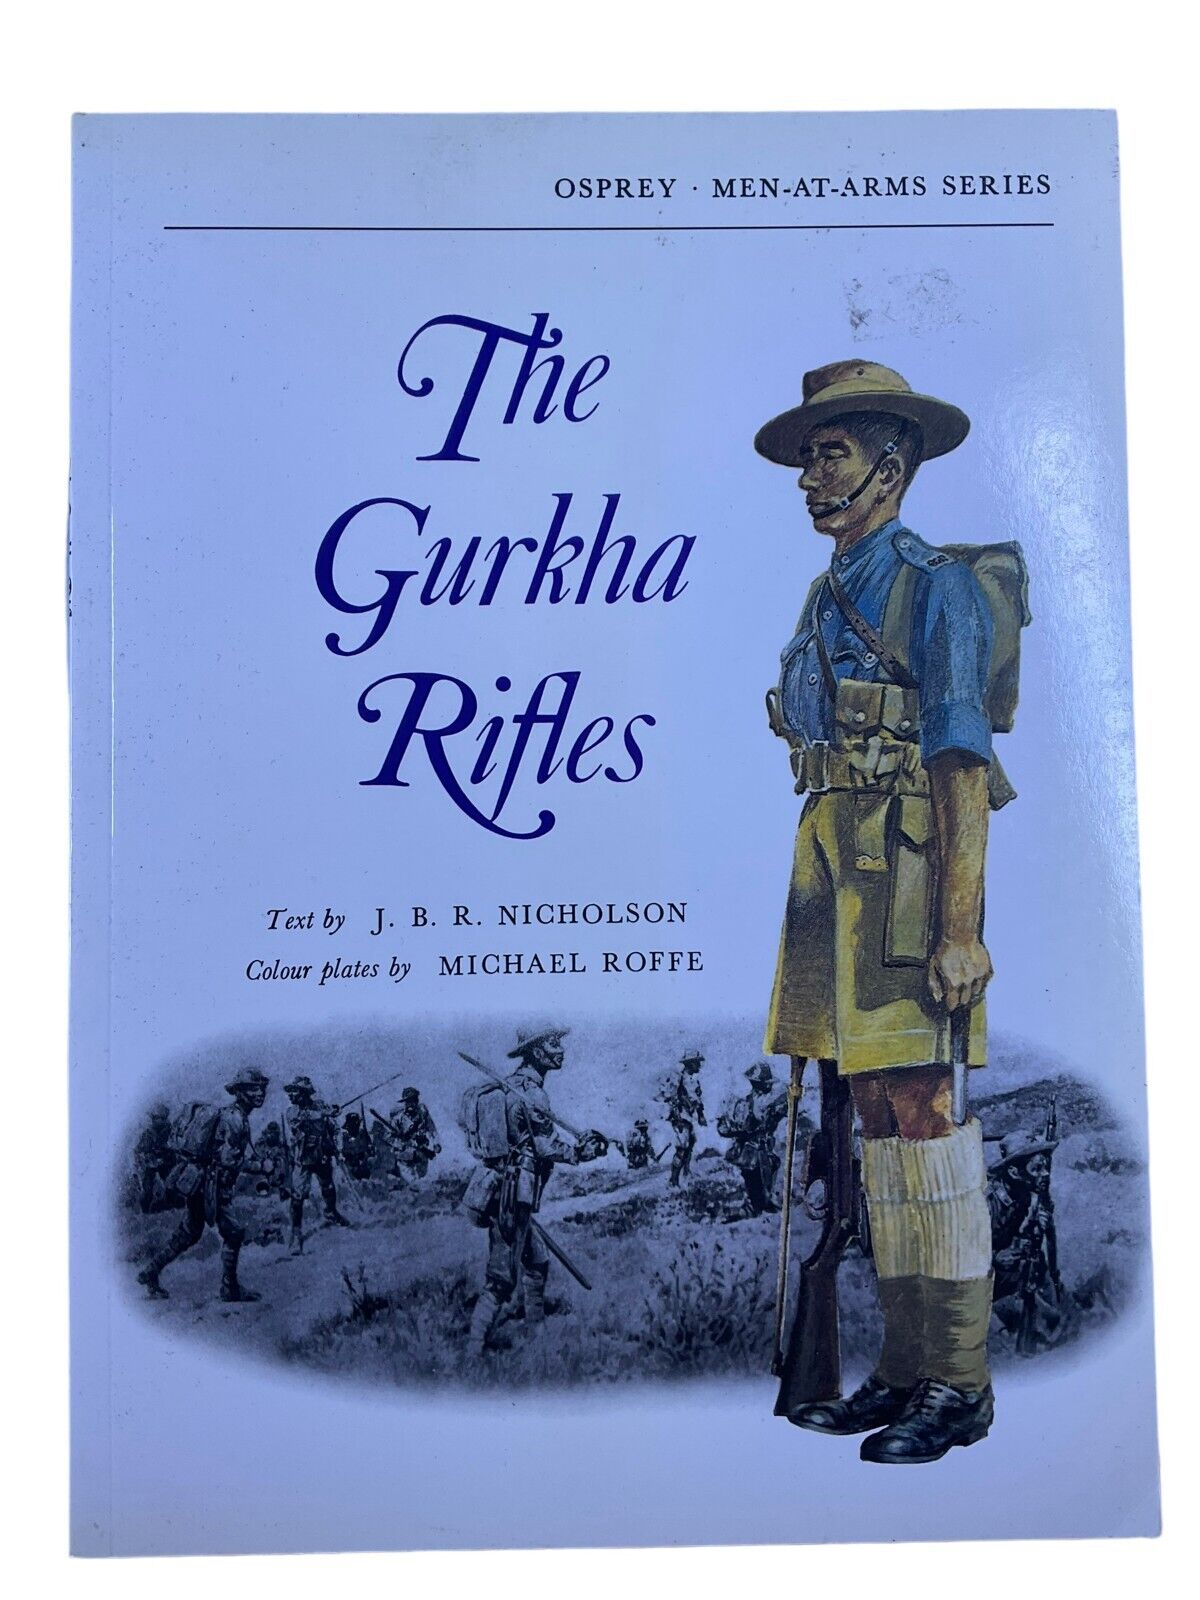 WW2 British The Gurkha Rifles Osprey Men At Arms Softcover Reference Book